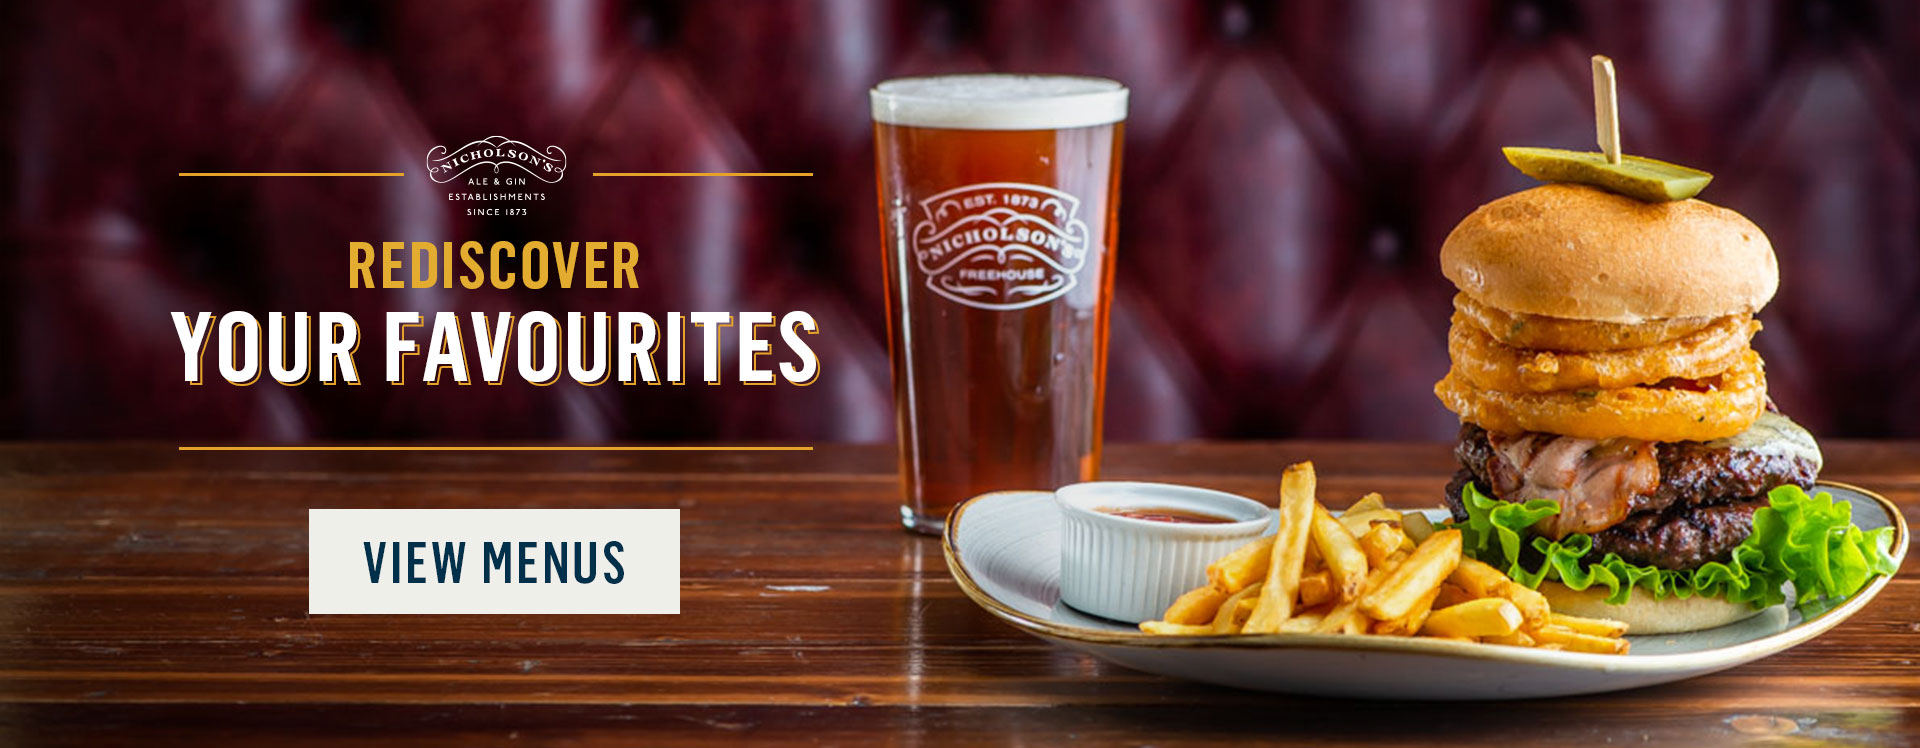 Rediscover your favourites at The Elephant and Castle